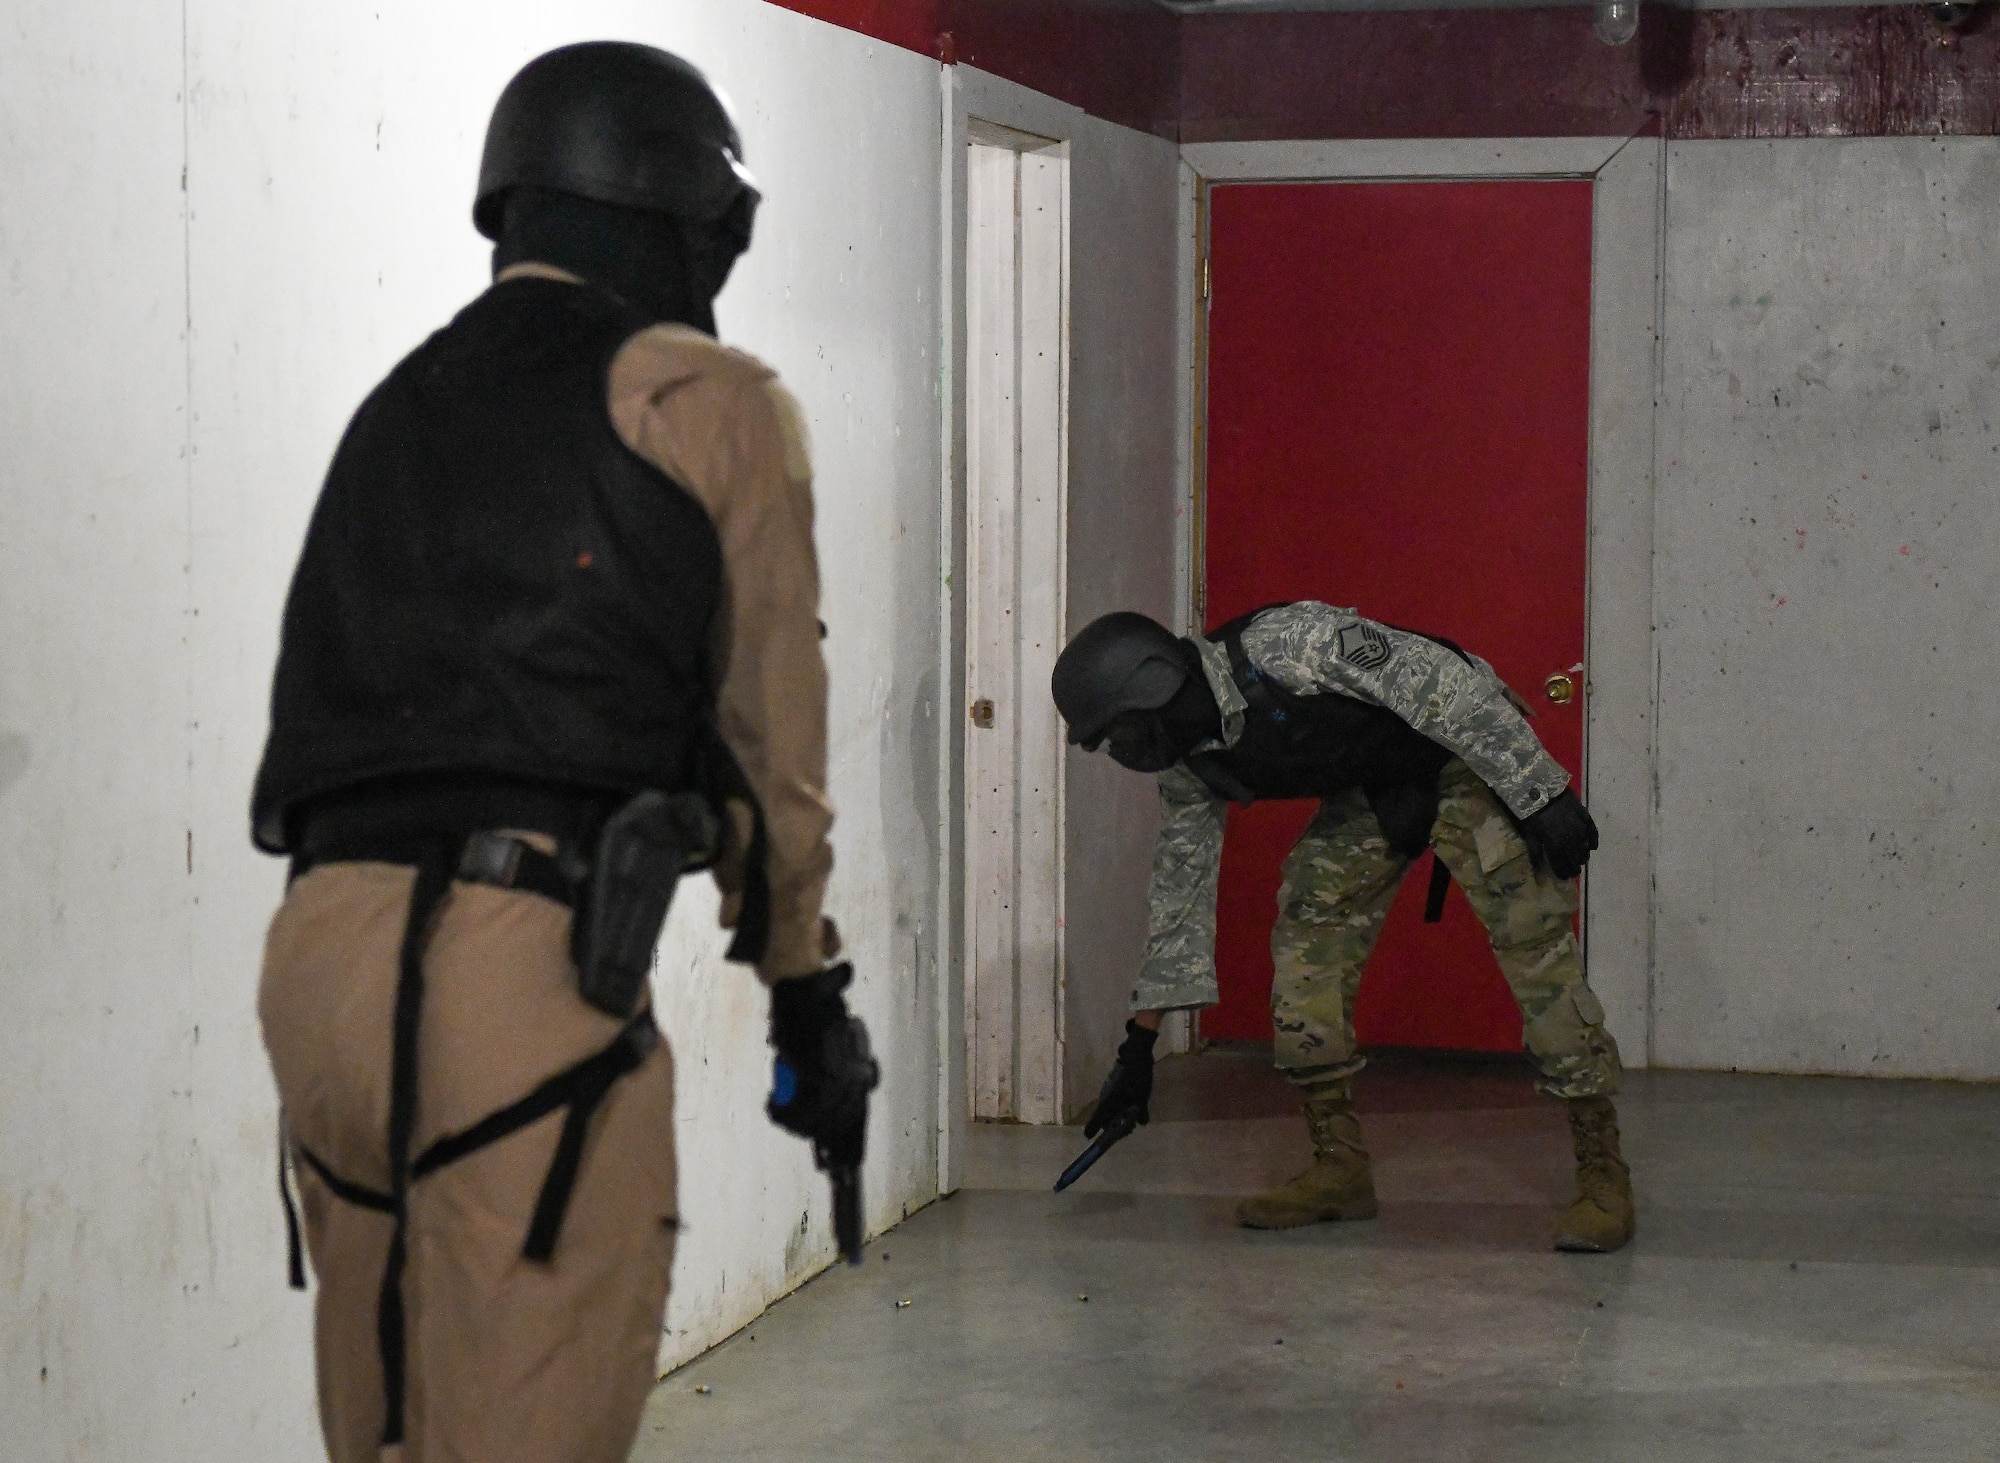 Two men with Simunitions weapons in hallway with one setting weapon on ground